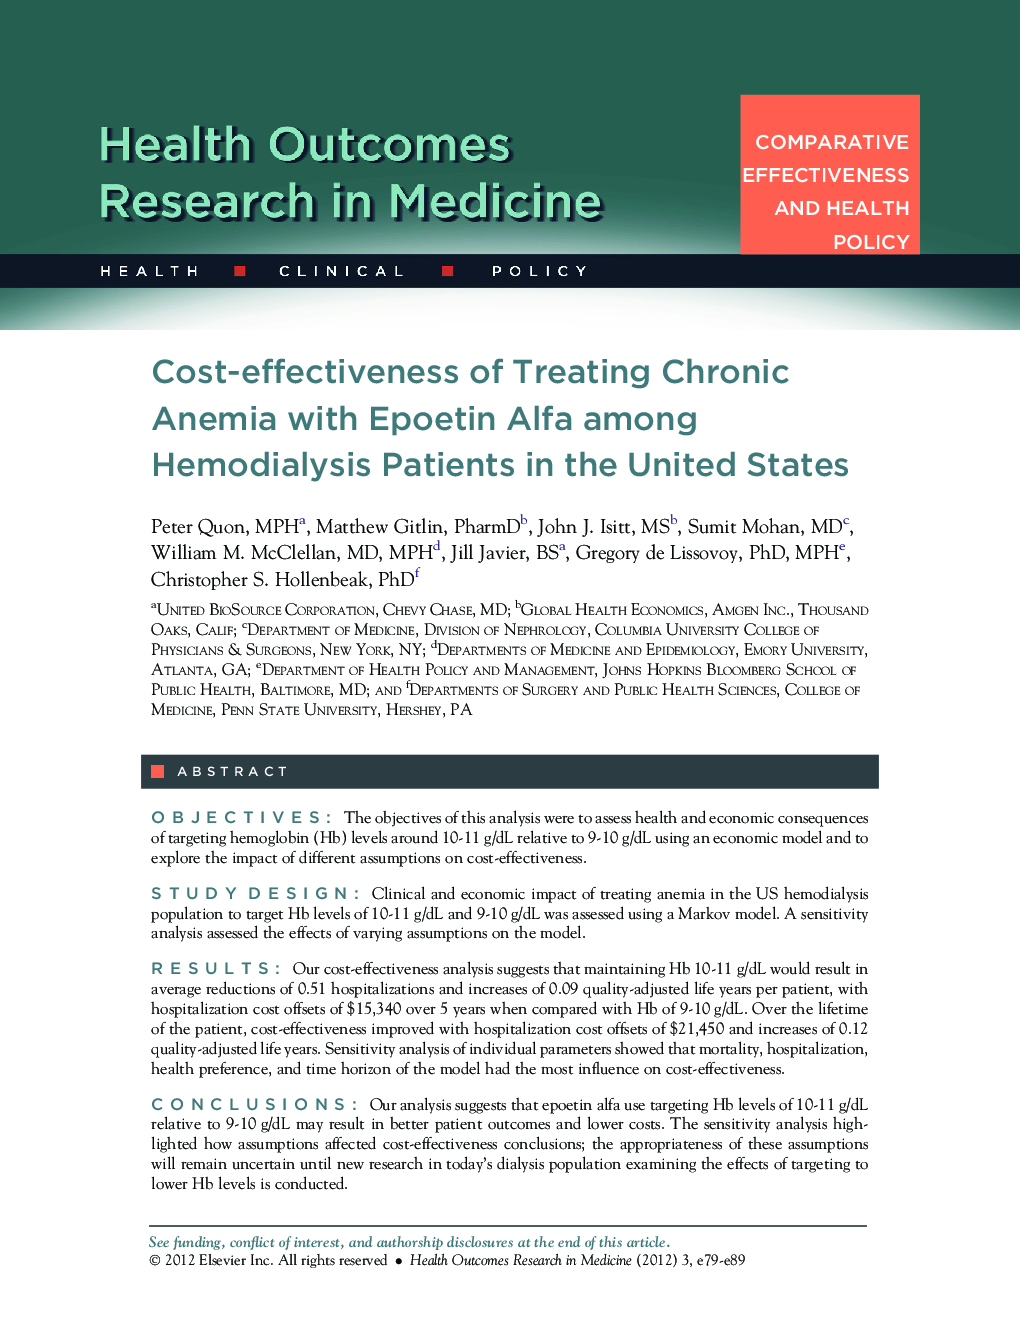 Cost-effectiveness of Treating Chronic Anemia with Epoetin Alfa among Hemodialysis Patients in the United States 